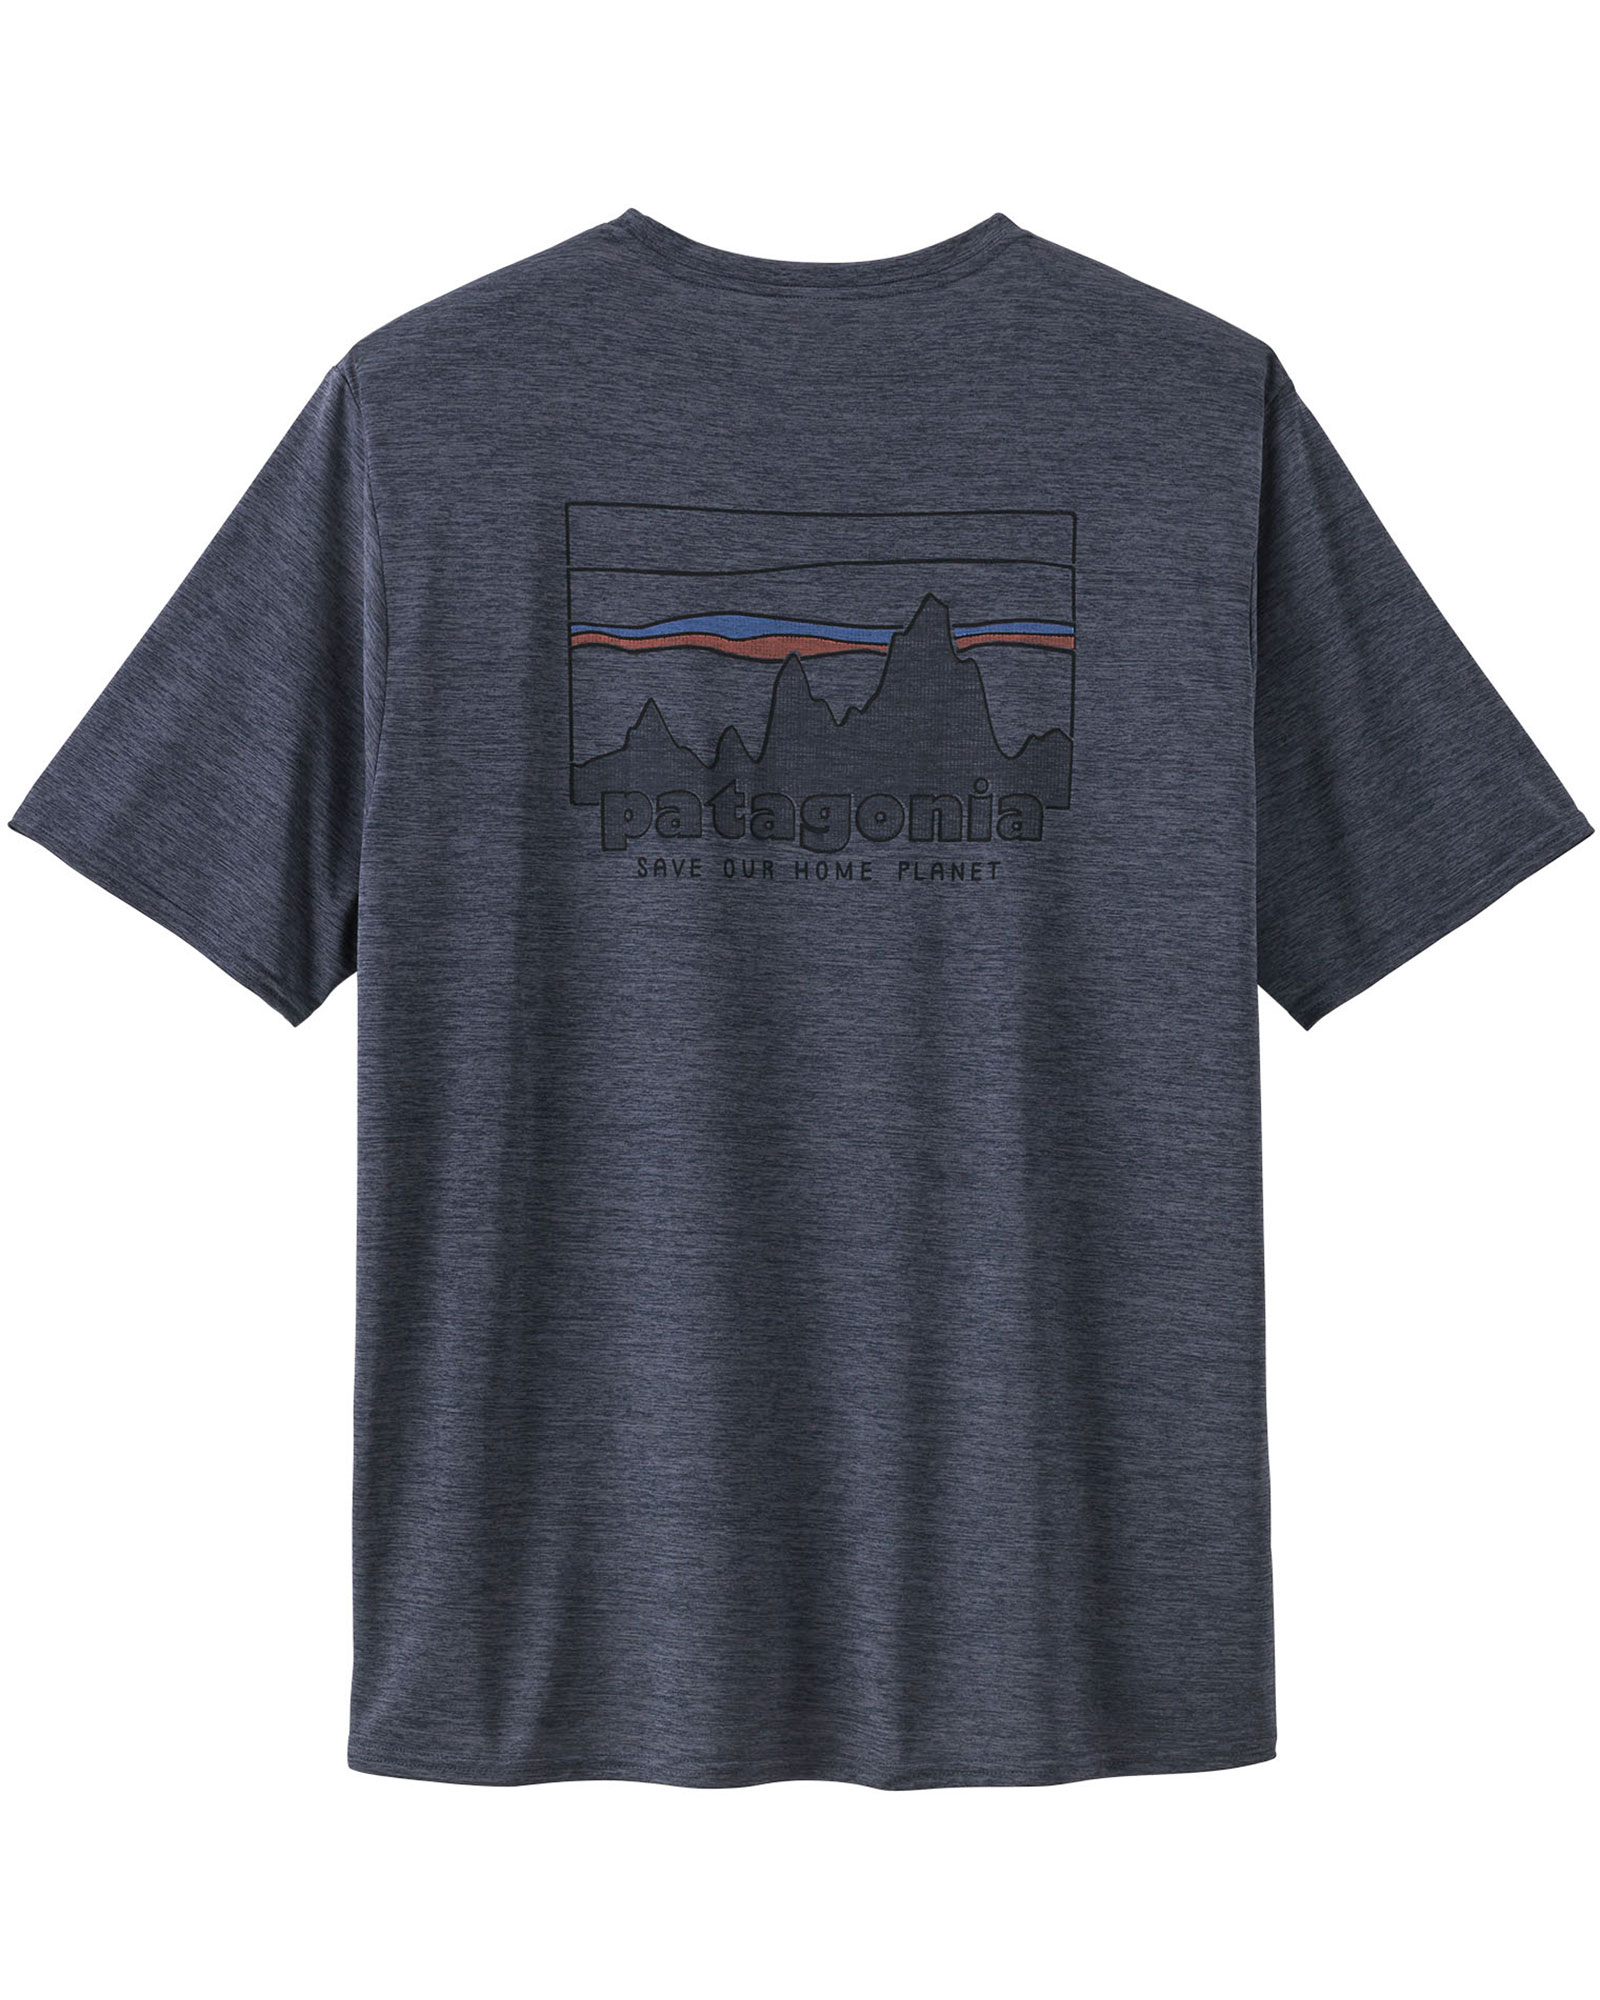 Patagonia Cap Cool Daily Graphic Men’s Tee - Smolder Blue/73 Skyline L